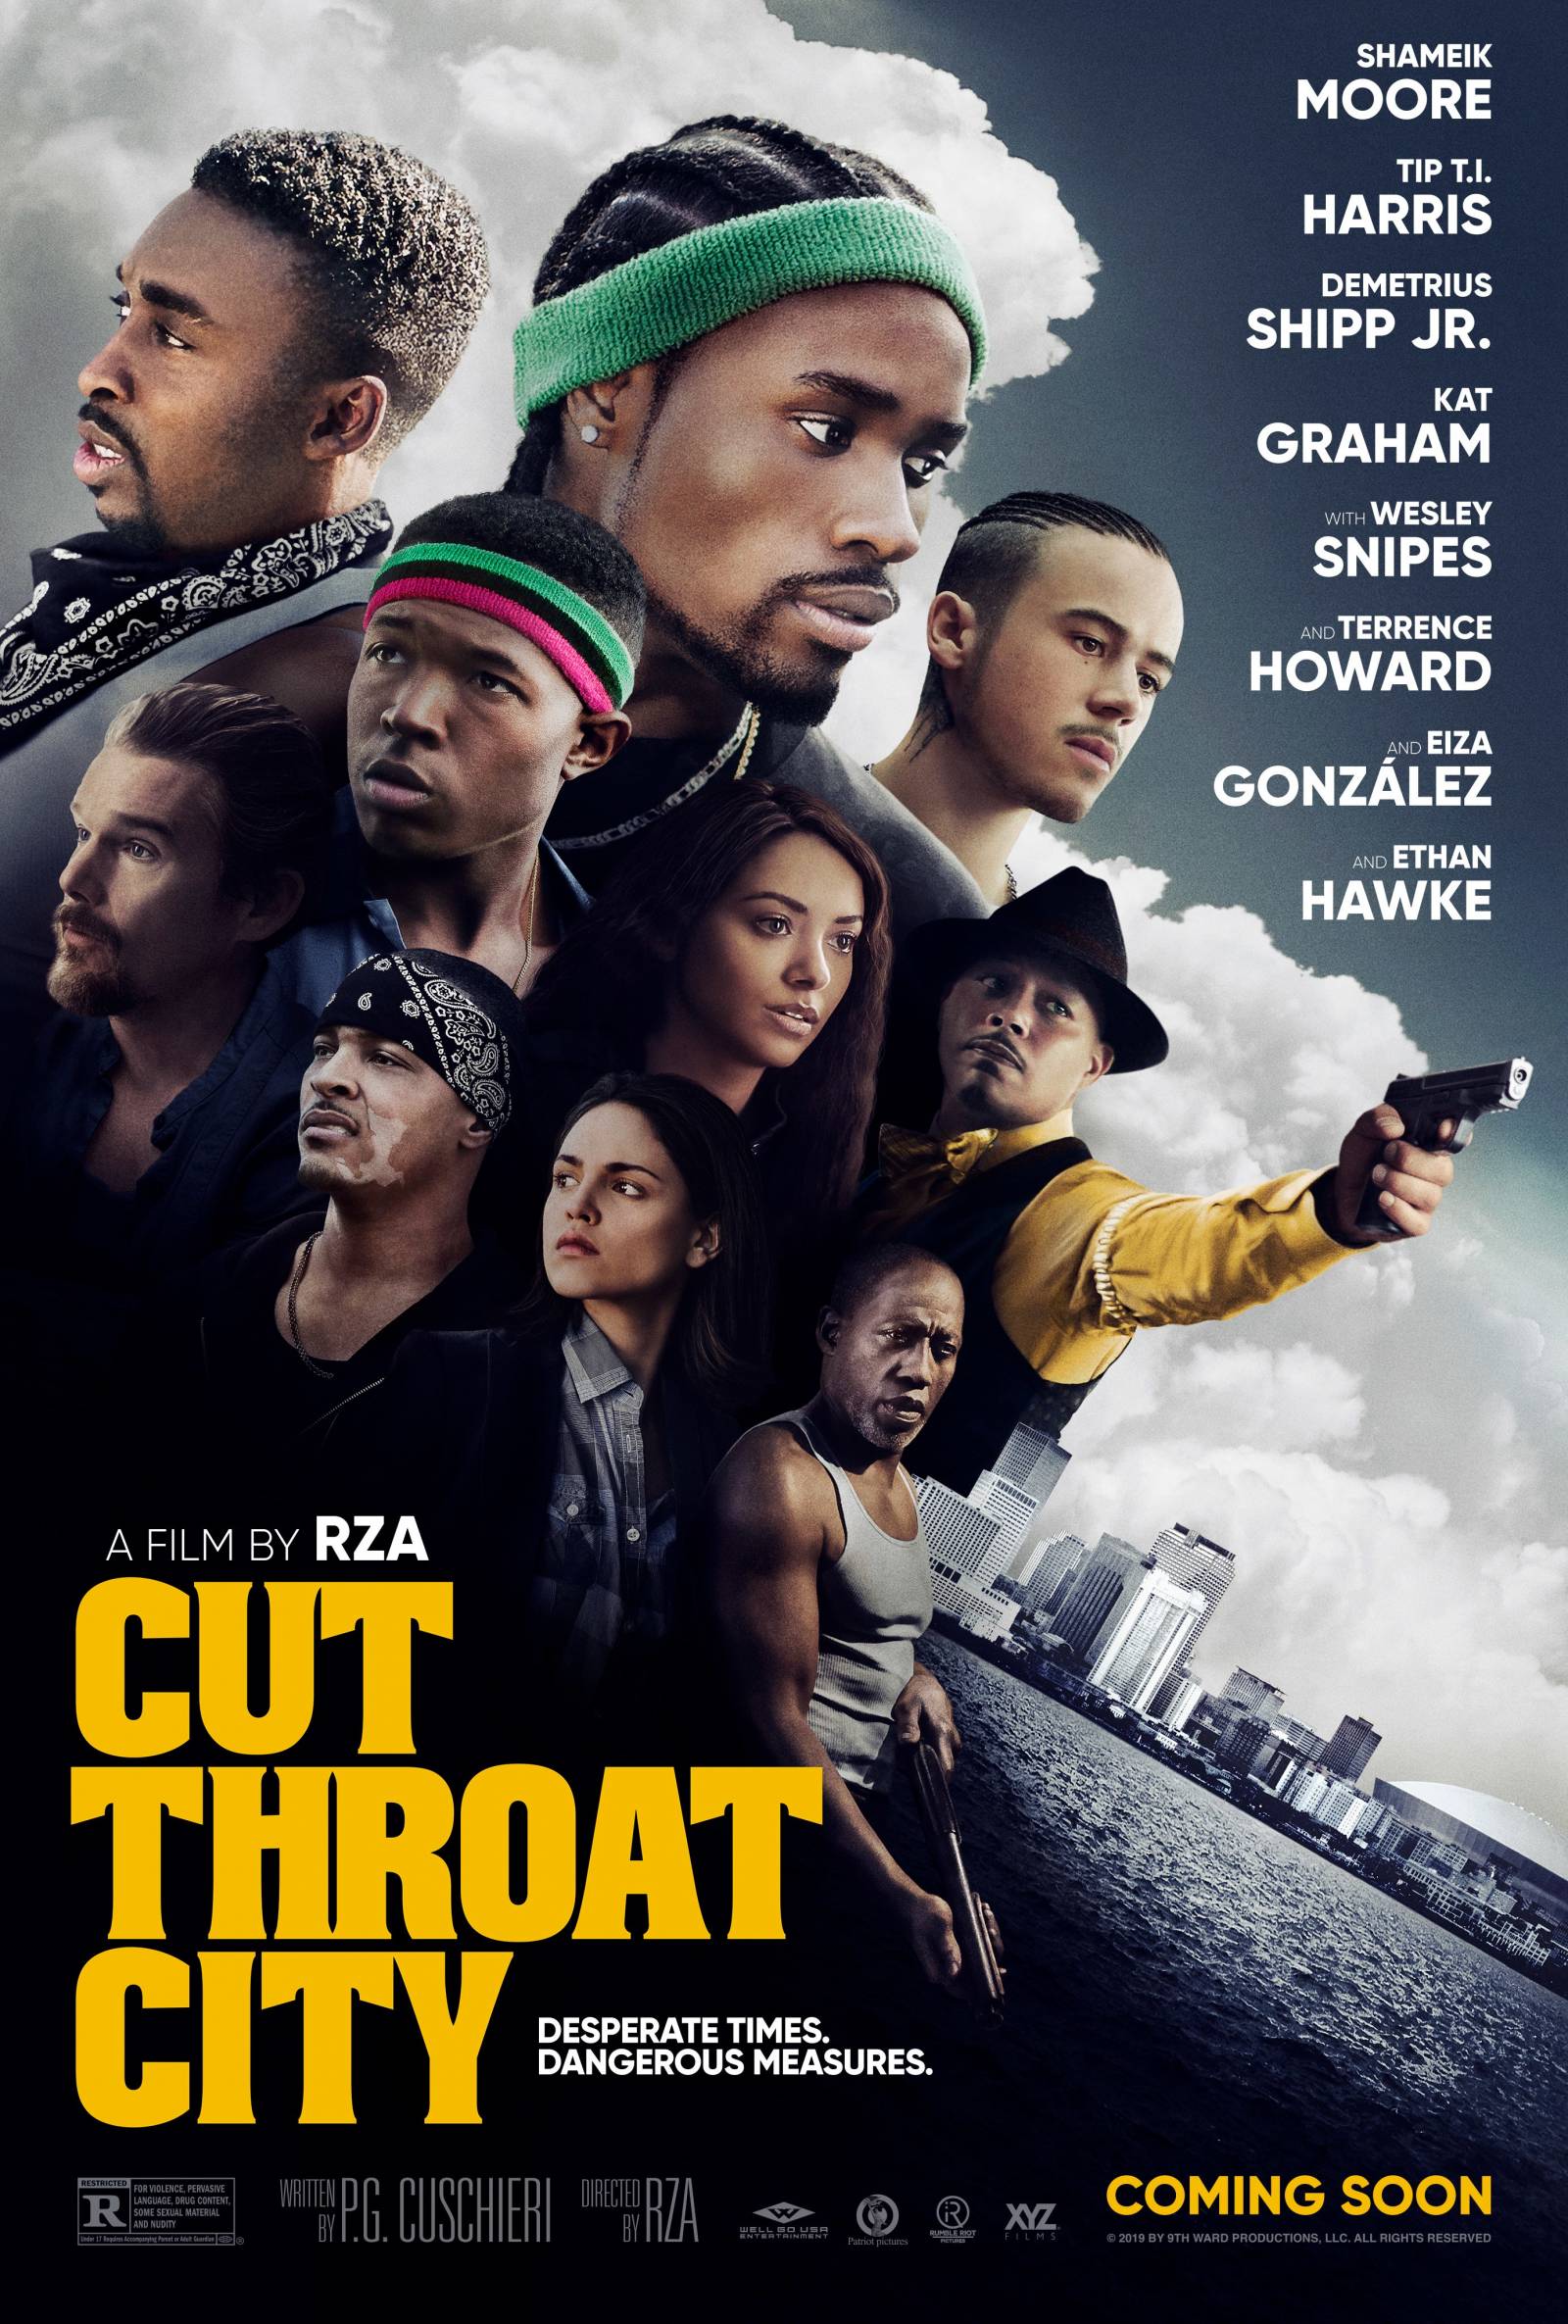 RZA-Directed, T.I., Terrence Howard, Wesley Snipes-Featured ‘Cut Throat City’ Gets New Trailer